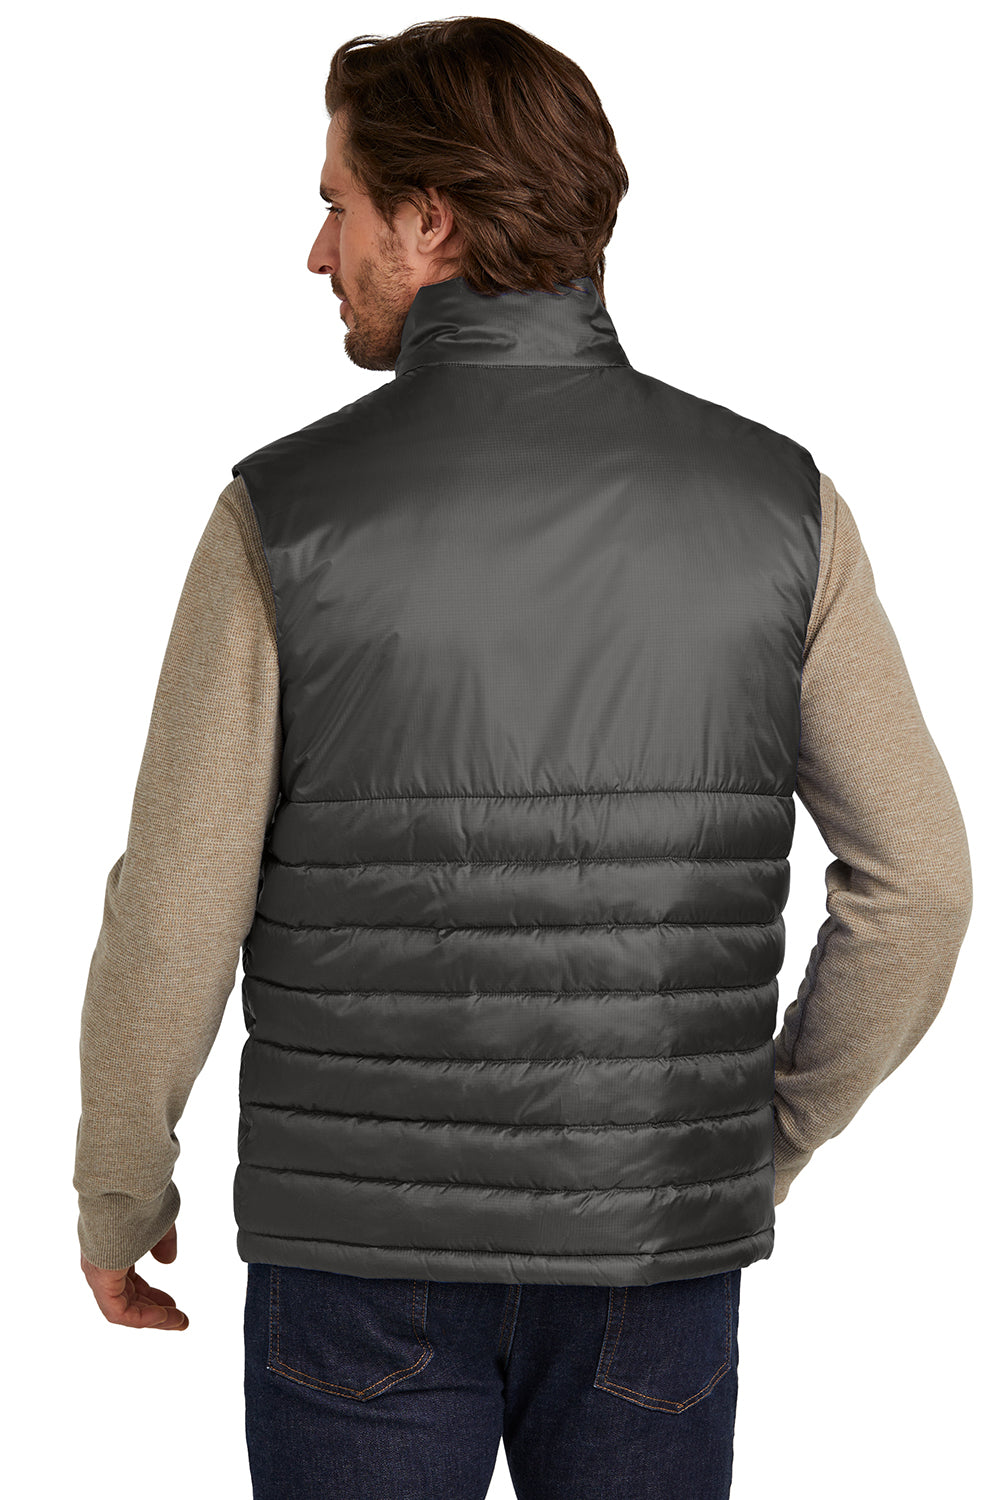 Eddie Bauer EB512 Mens Water Resistant Quilted Full Zip Vest Iron Gate Grey Model Back